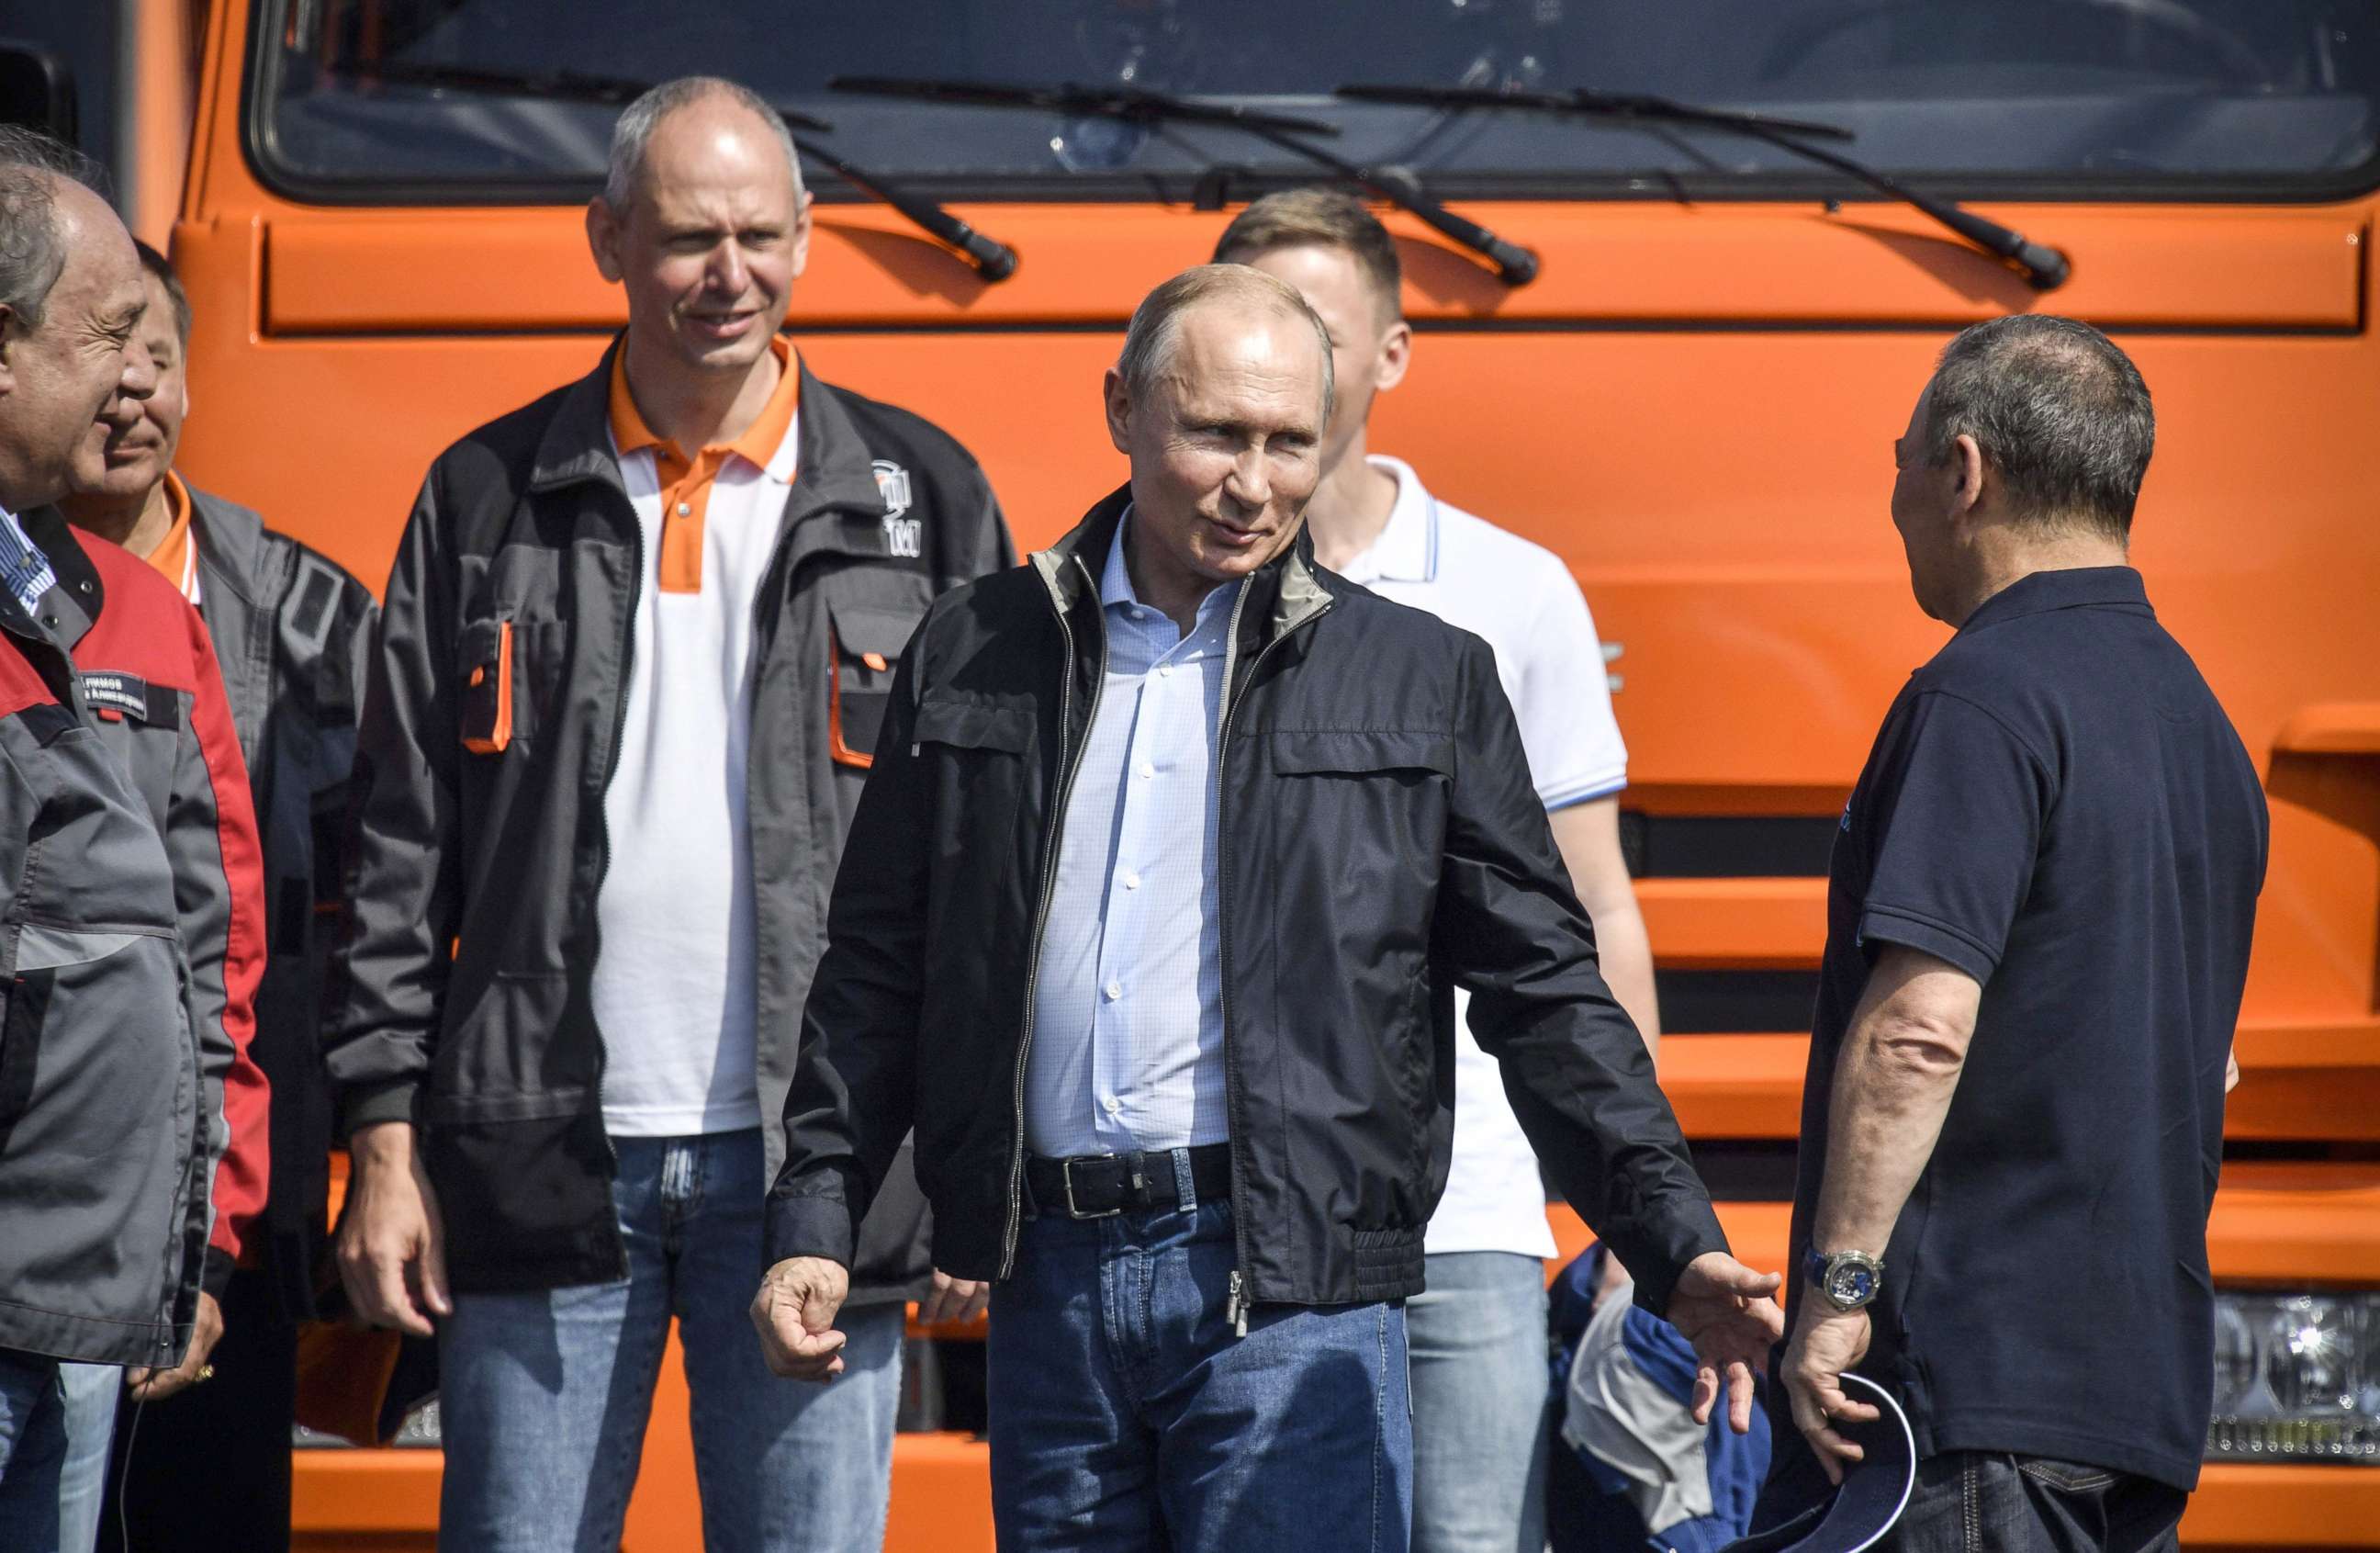 PHOTO: Russian President Vladimir Putin (C) talks to workers after driving a construction truck across the new 12 miles road-and-rail Crimean Bridge over the Kerch Strait that links mainland Russia to Moscow-annexed Crimea, May 15, 2018.